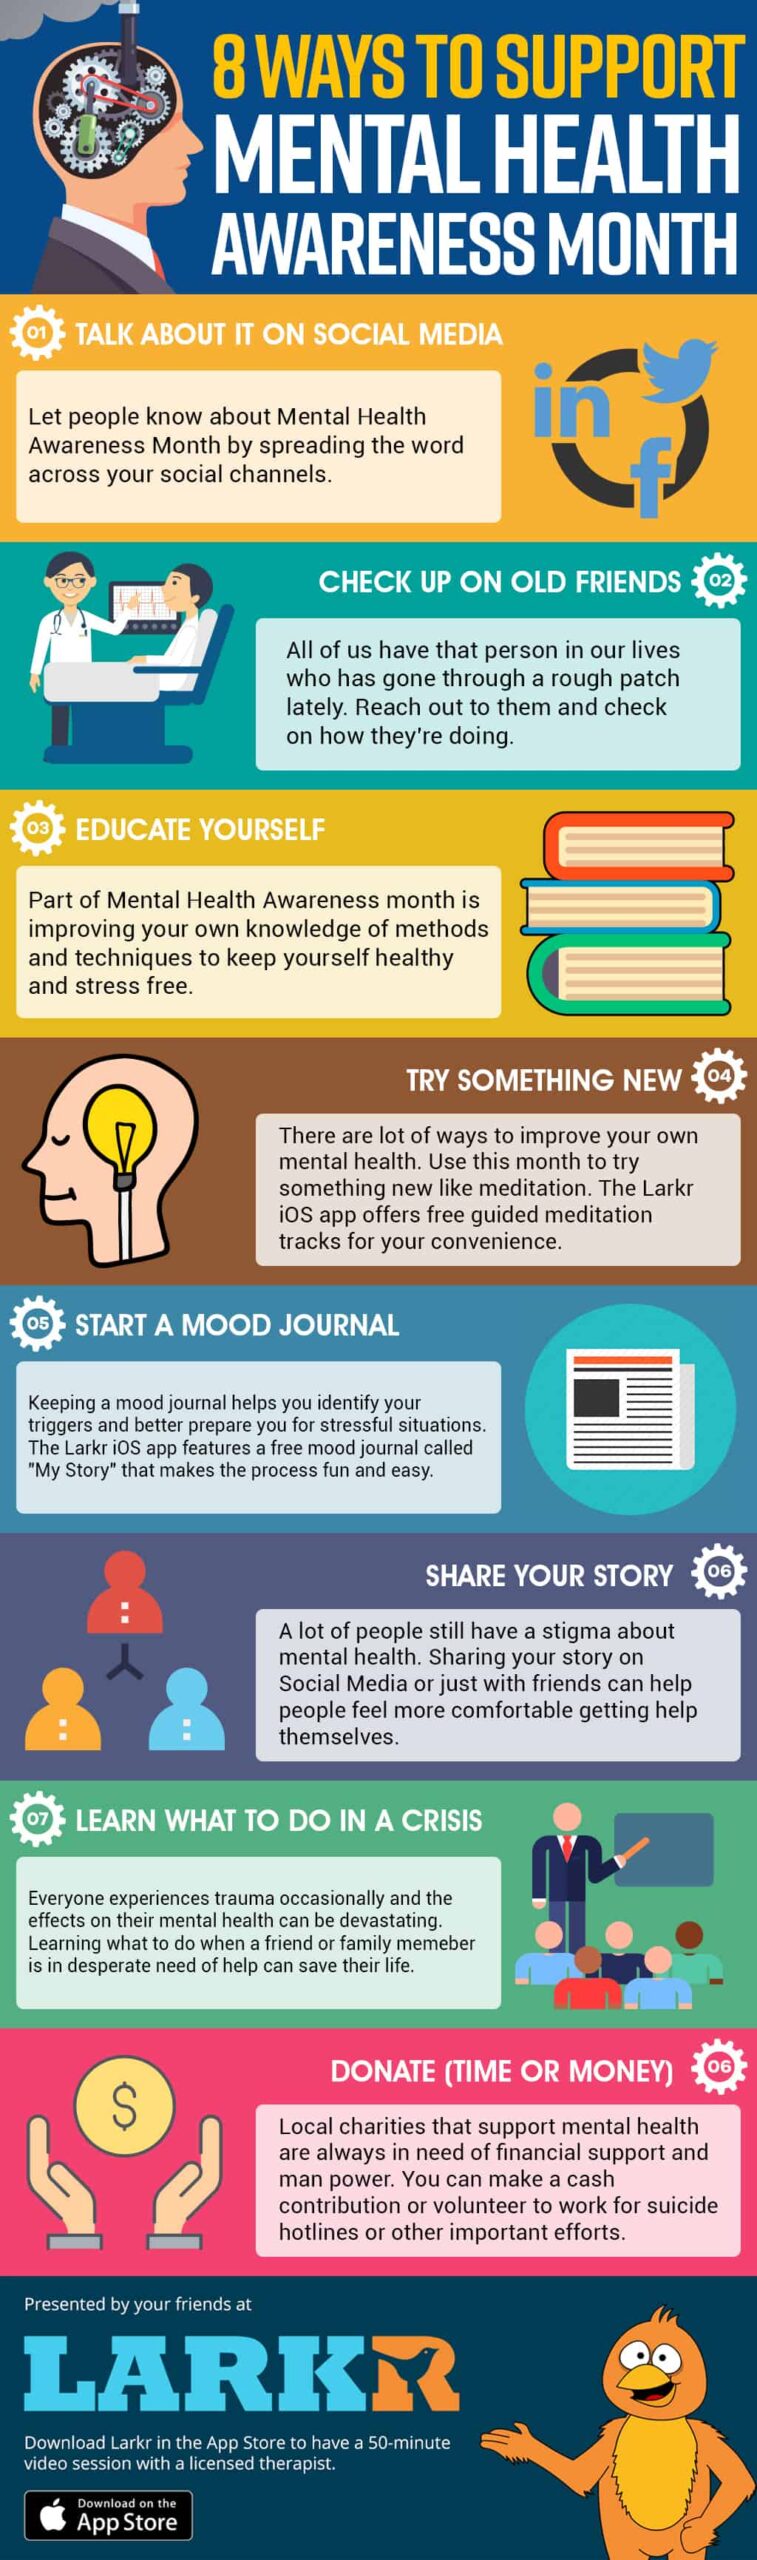 Mental Health Awareness Week  infographic - Counselling Directory